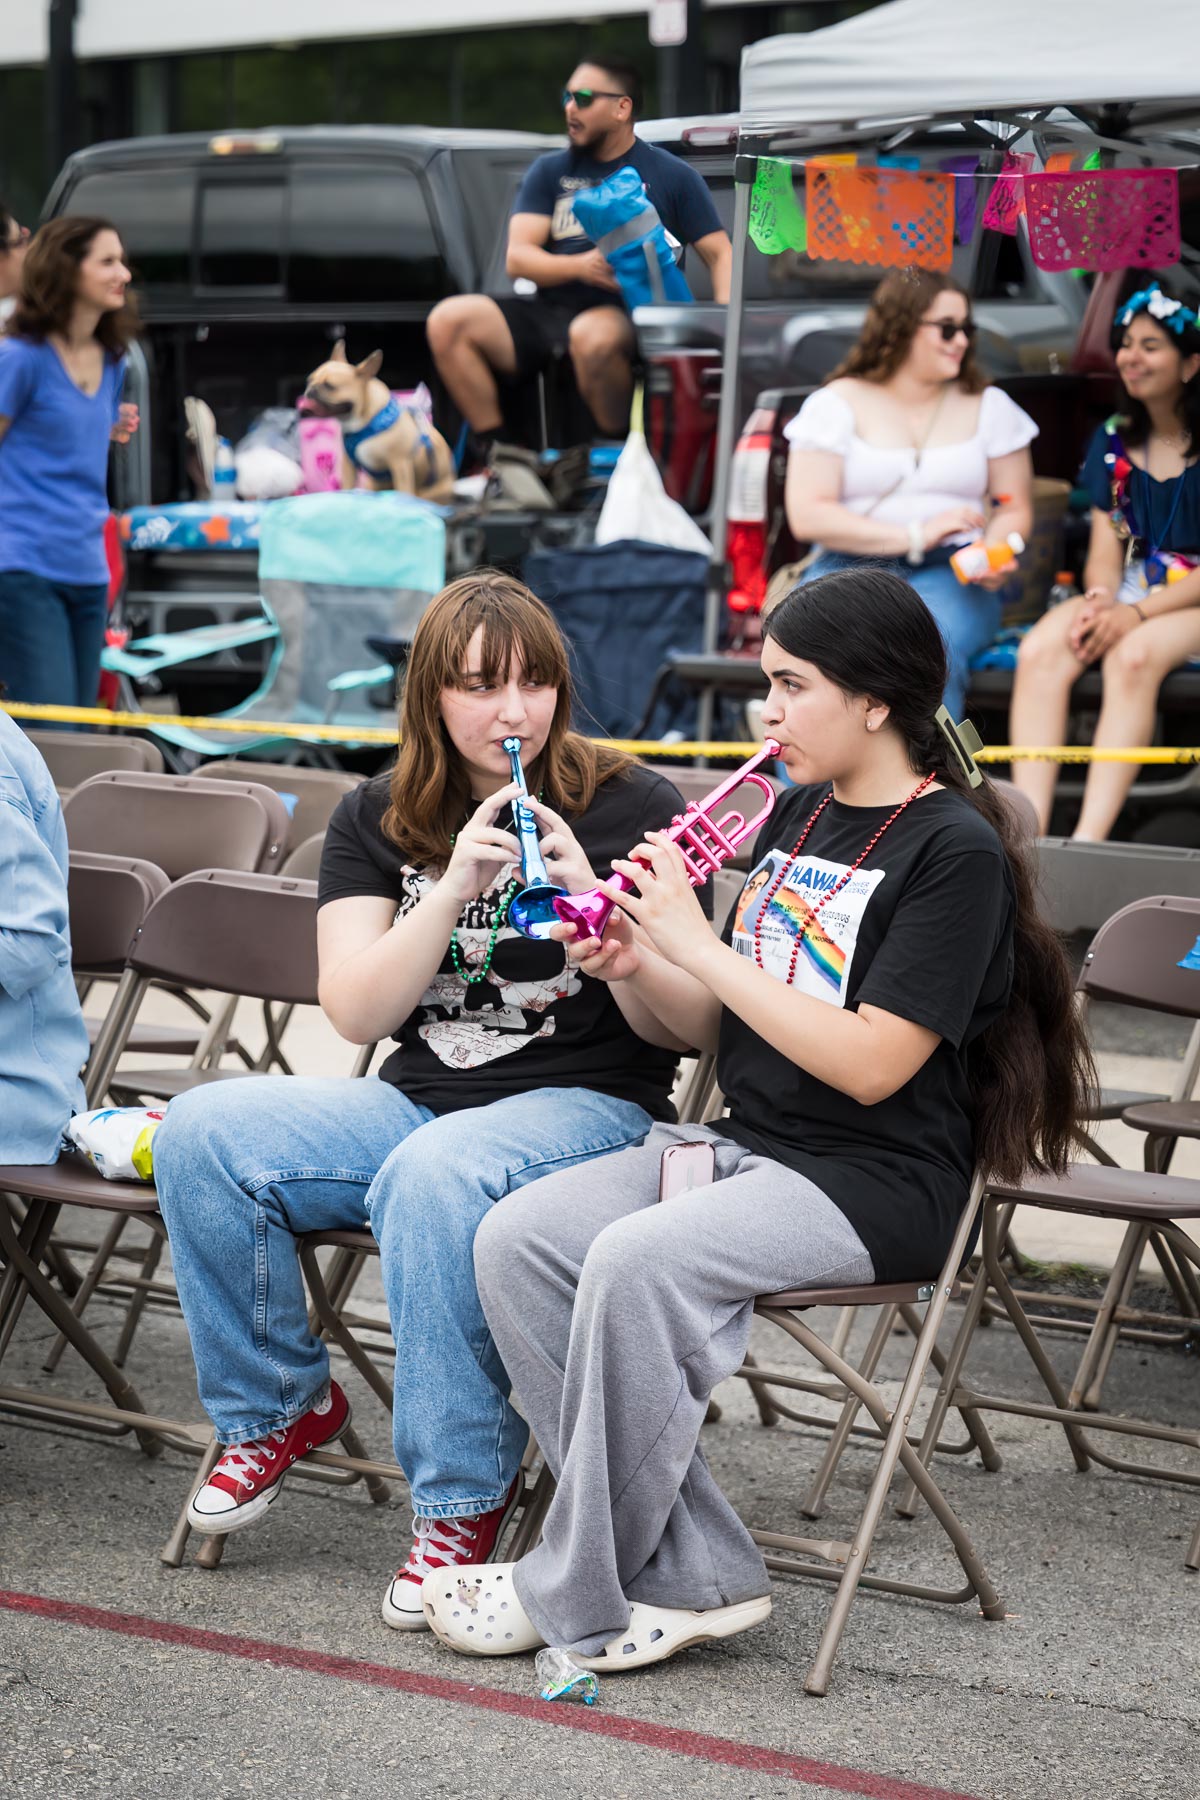 Two girls blowing toy horns and sitting in metal chairs for an article on the Fiesta photo tips